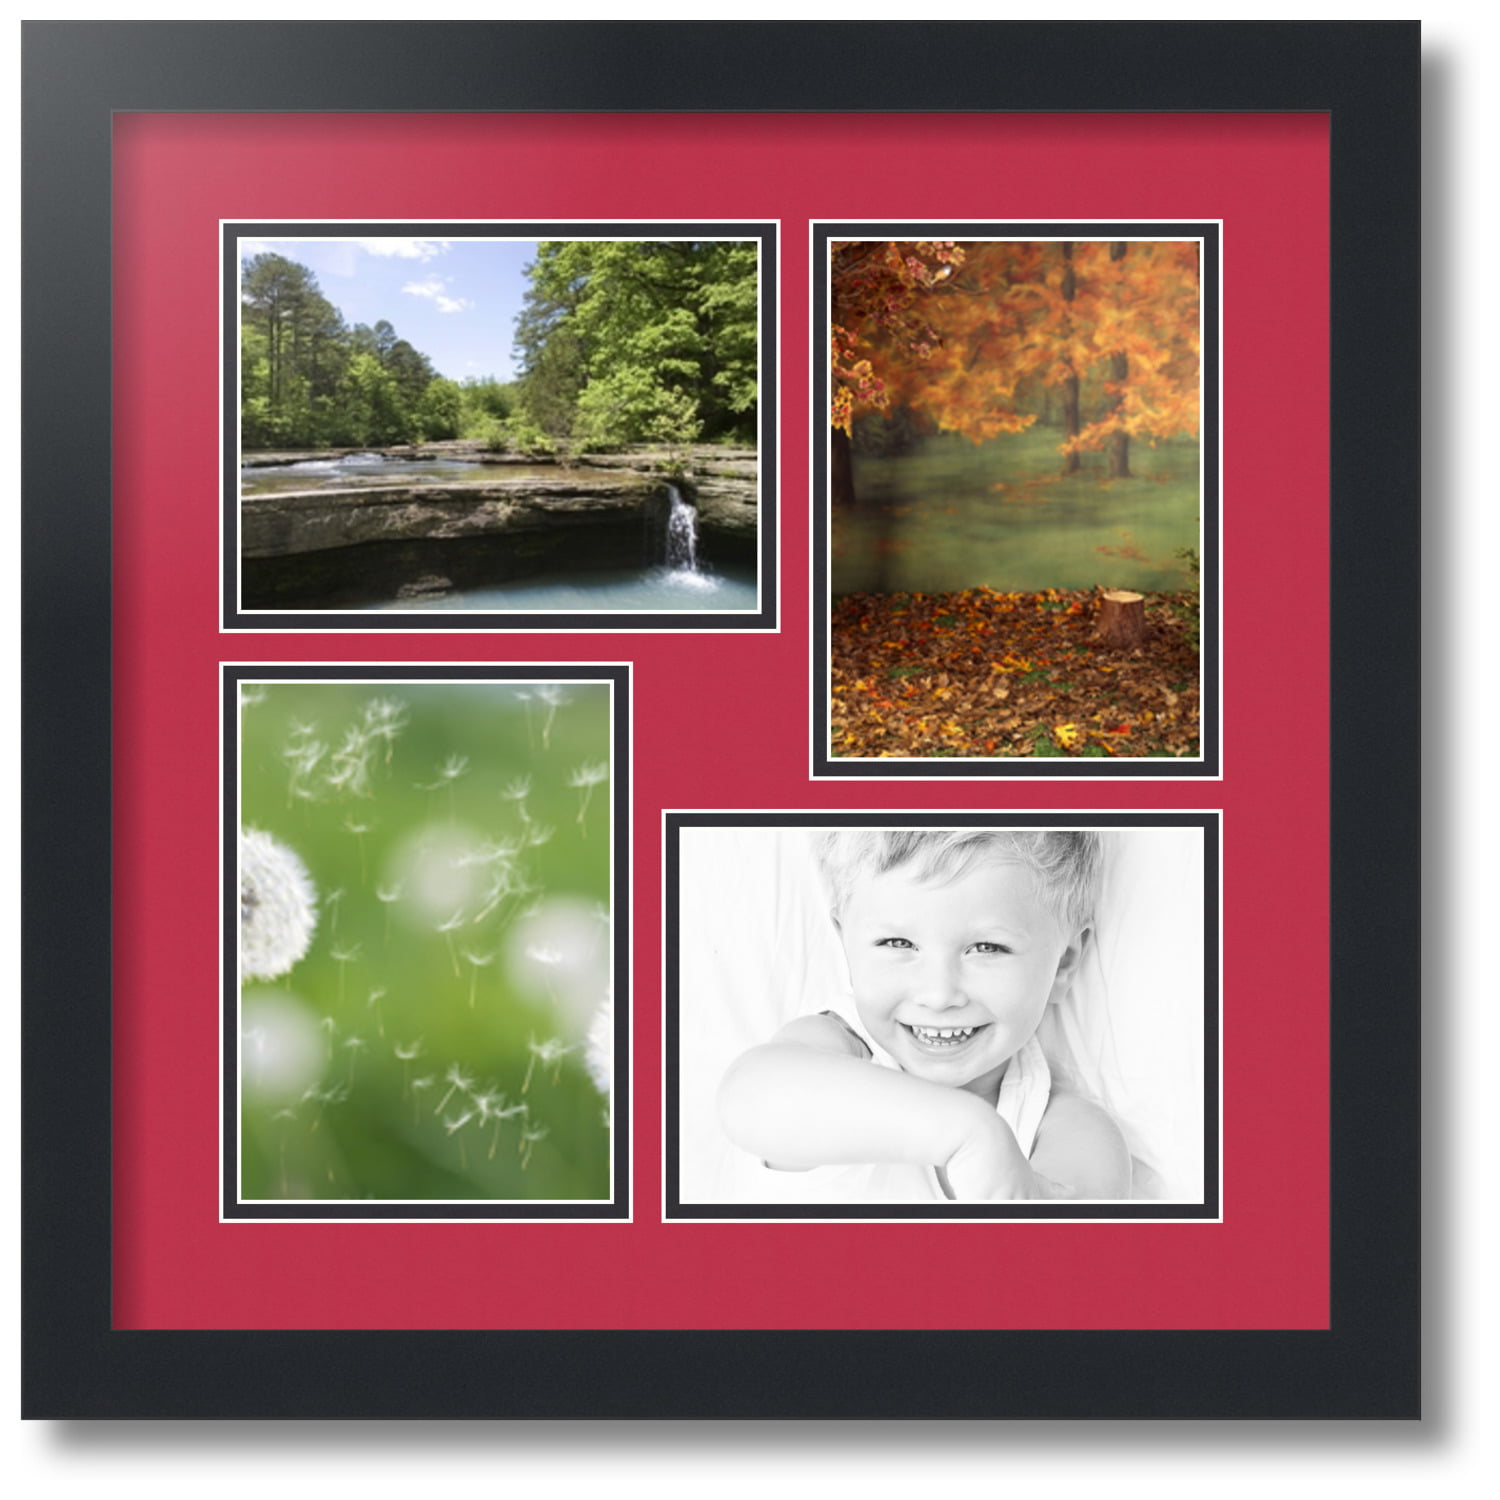 Reorganiseren Rondlopen Verzoekschrift ArtToFrames Collage Photo Picture Frame with 4 - 5x7 Openings, Framed in  Black with Rouge and Black Mats (CDM-3926-16) - Walmart.com